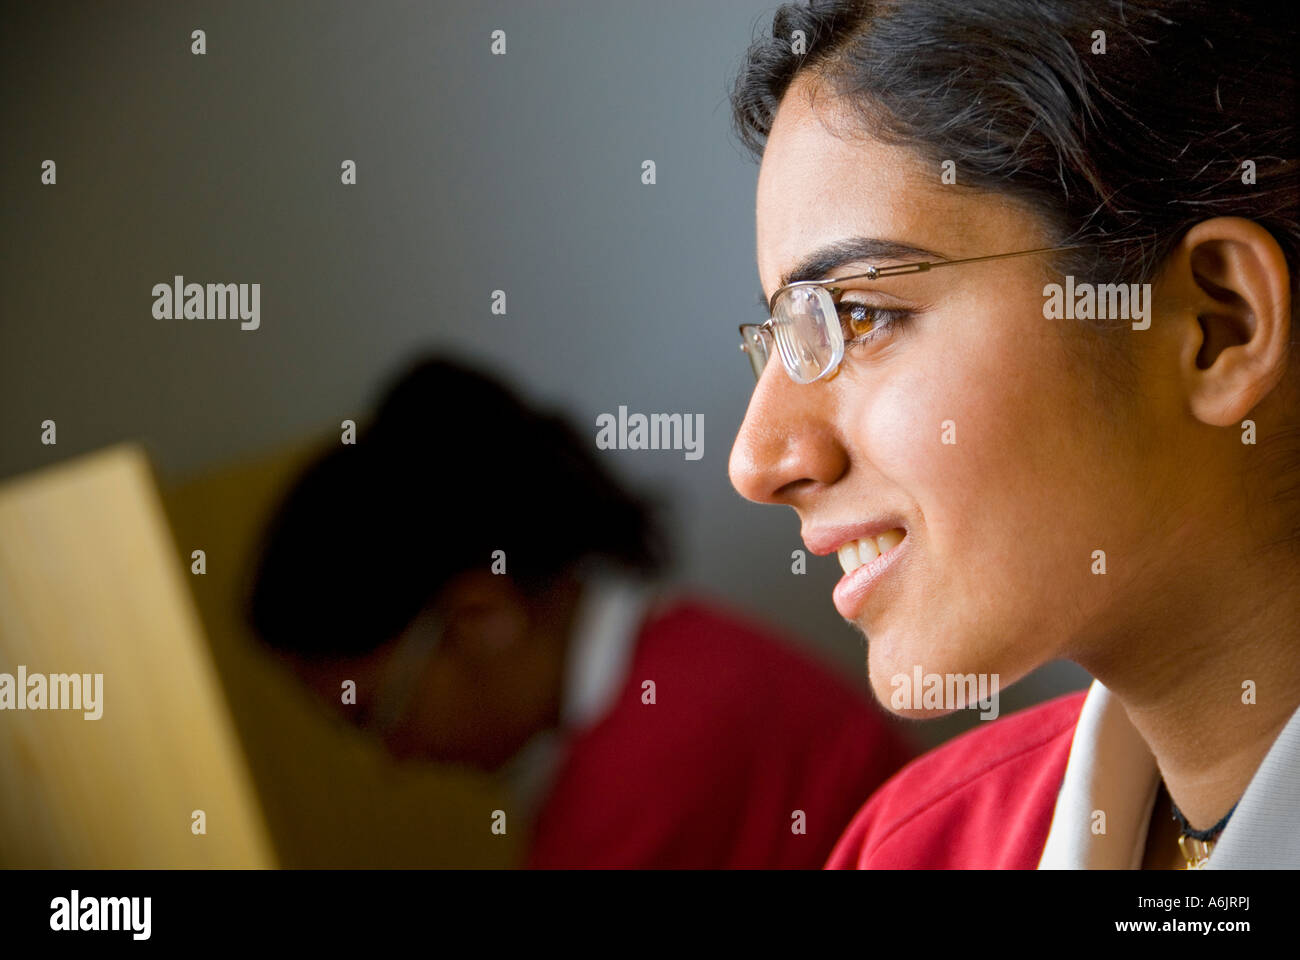 Asian Girl School Teenager 14-16 years senior high school girl pupil student wearing glasses smiling looking out of window school study library Stock Photo